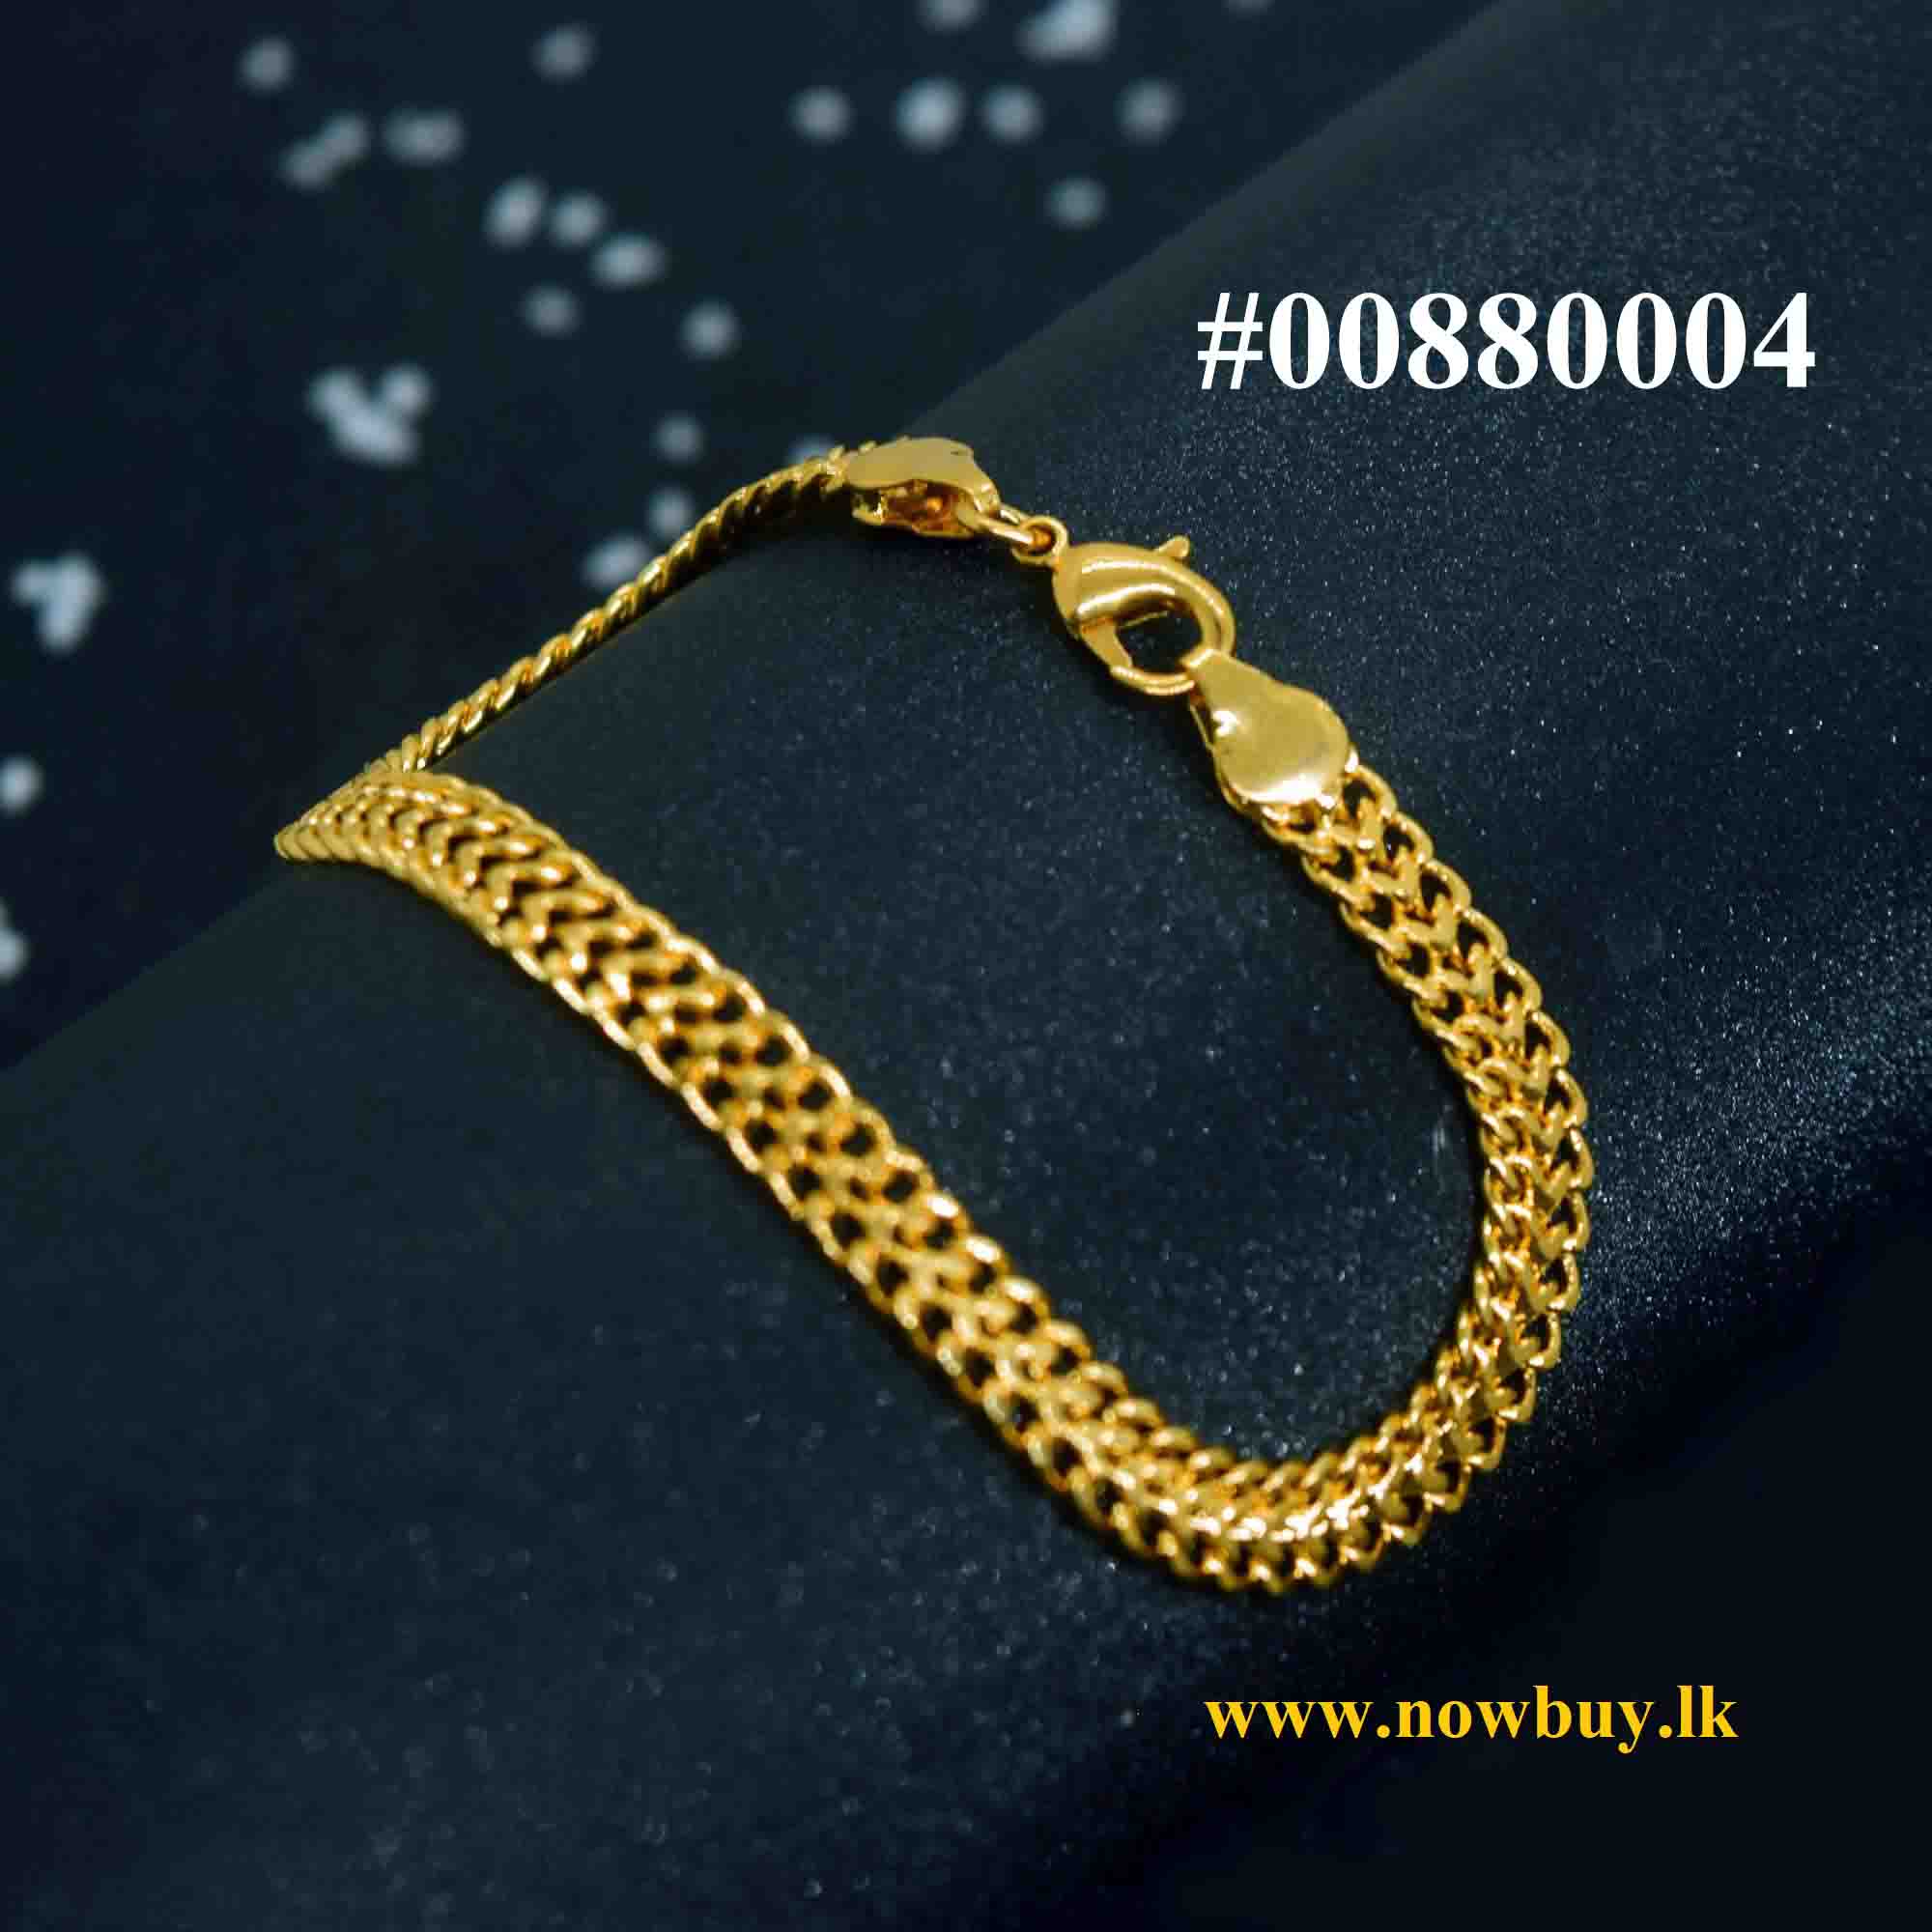 Gold plated Stylish Rich Look pooran bracelet For All from nowbuy.lk Bracelets & Bangles NowBuy.lk 2